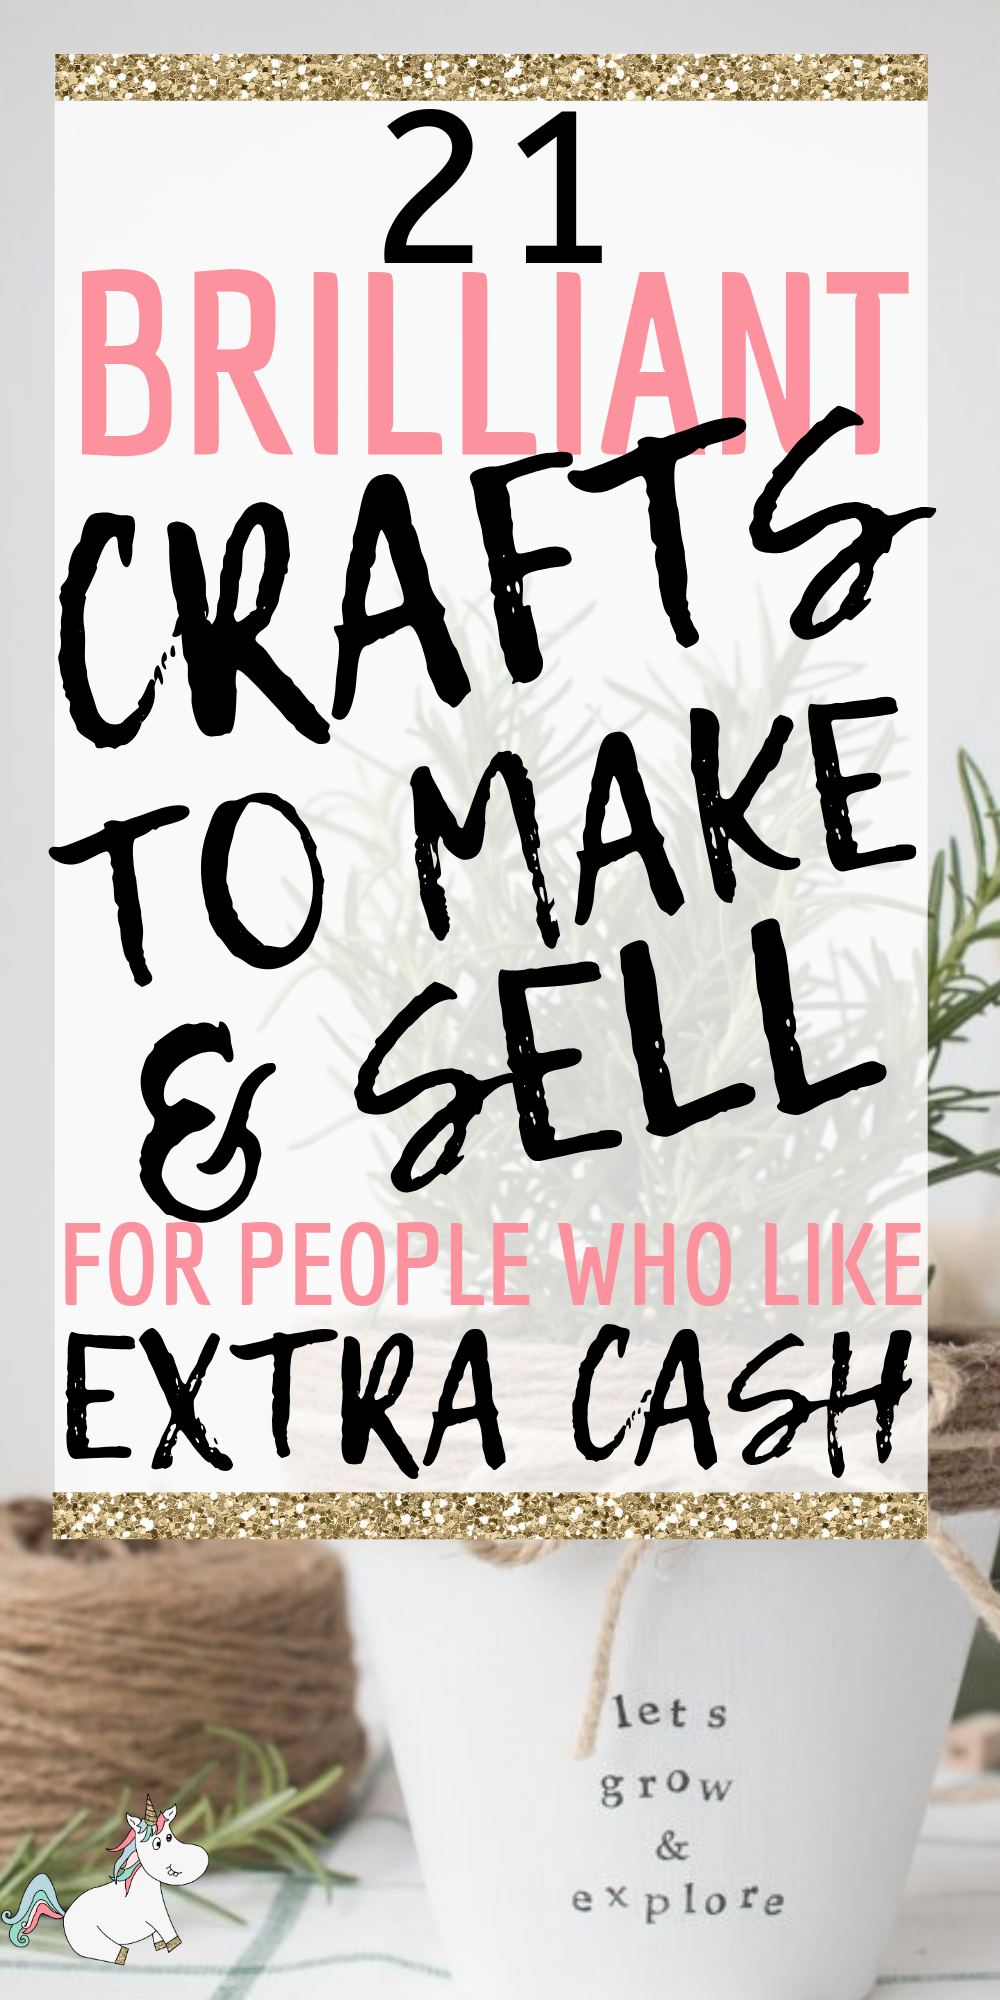 21 Brilliant Crafts To Make And Sell For Extra Cash In 2019 -   18 diy projects To Sell homemade ideas